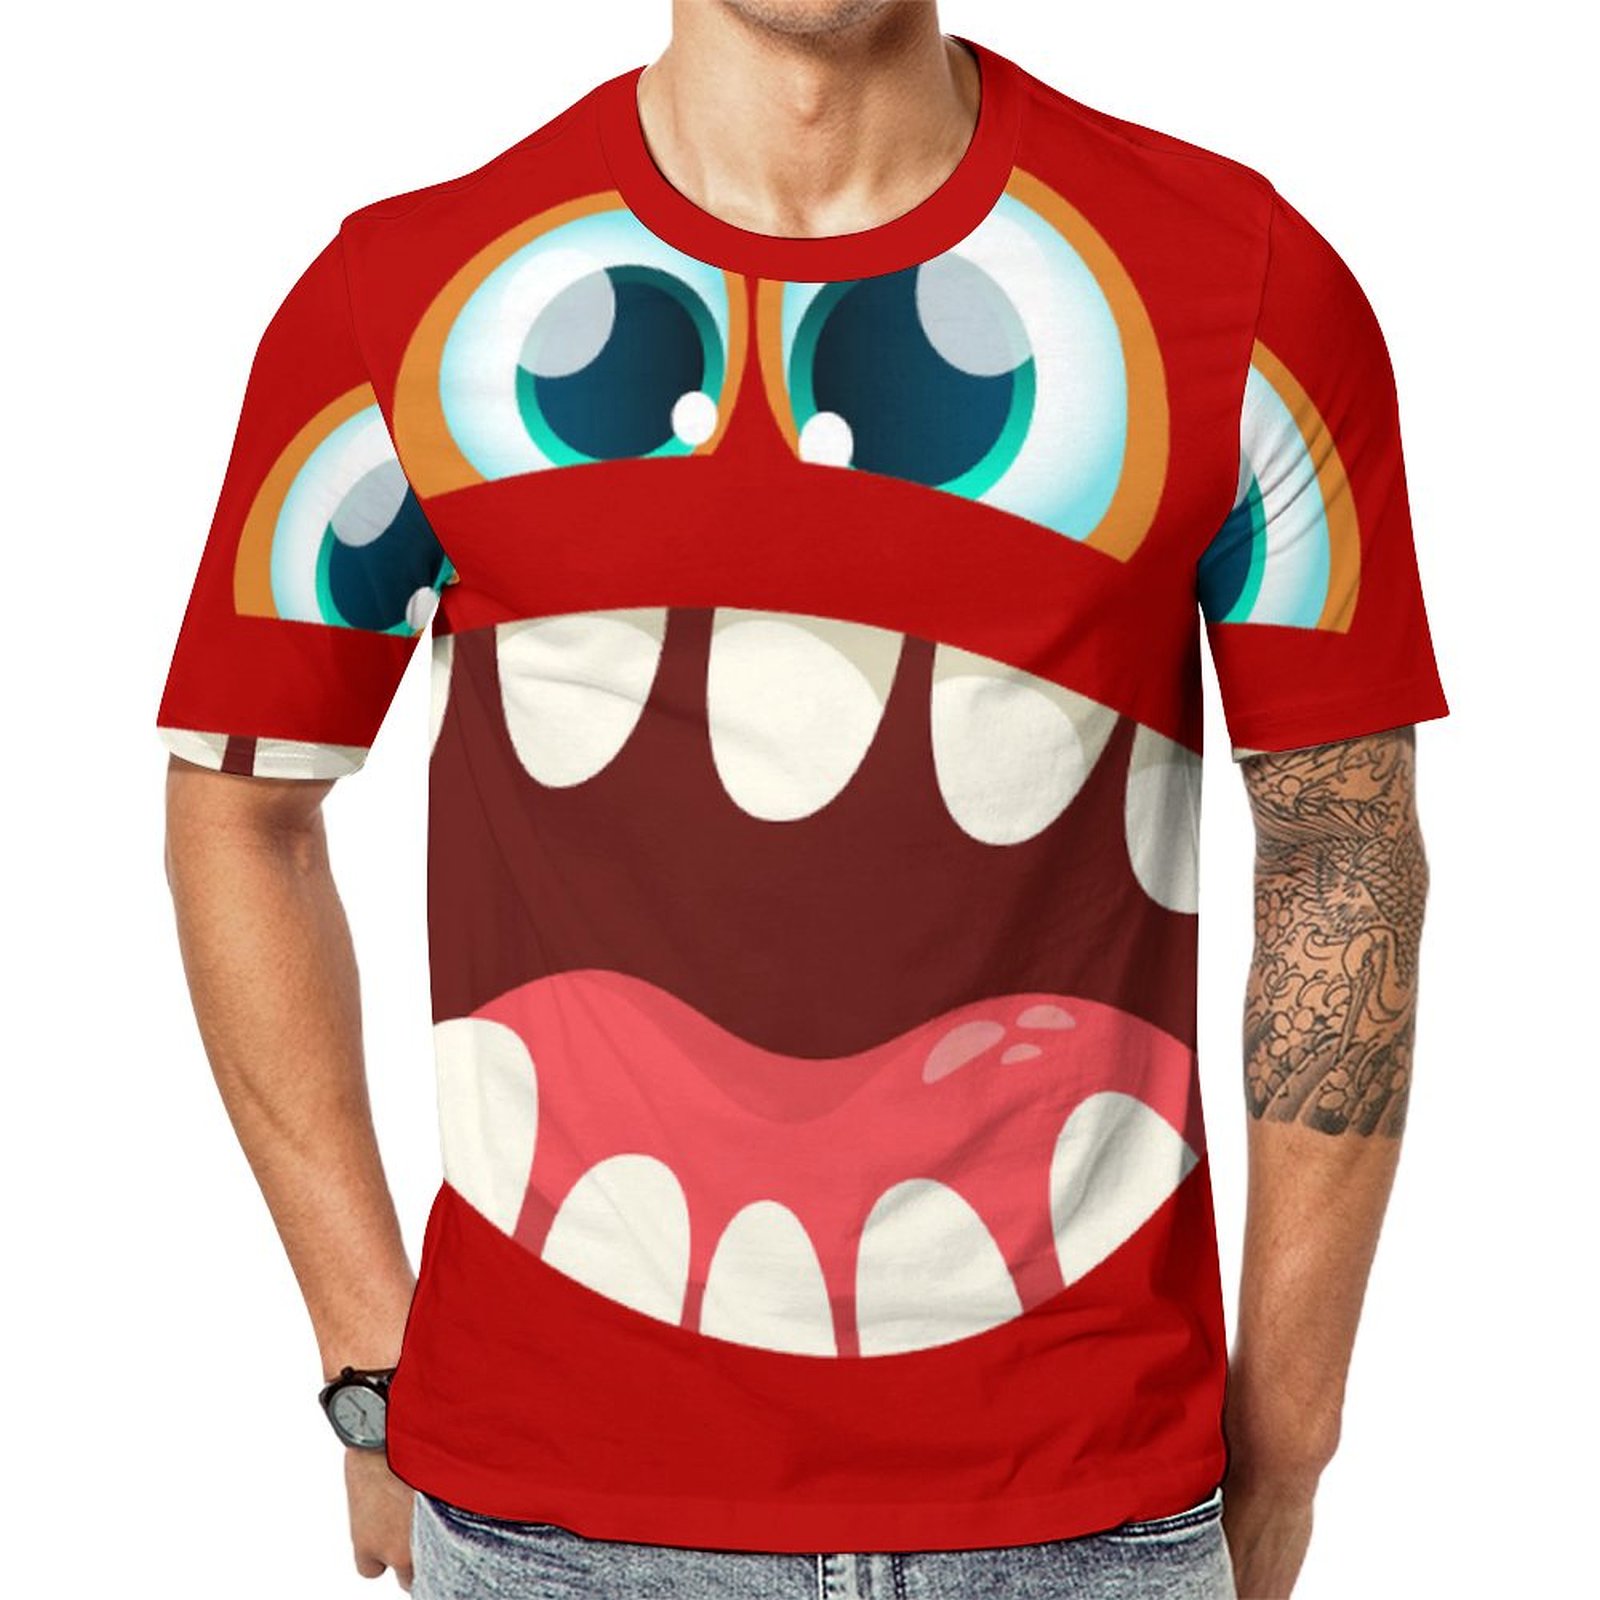 Scary Silly Monster Face For Kids Red Short Sleeve Print Unisex Tshirt Summer Casual Tees for Men and Women Coolcoshirts